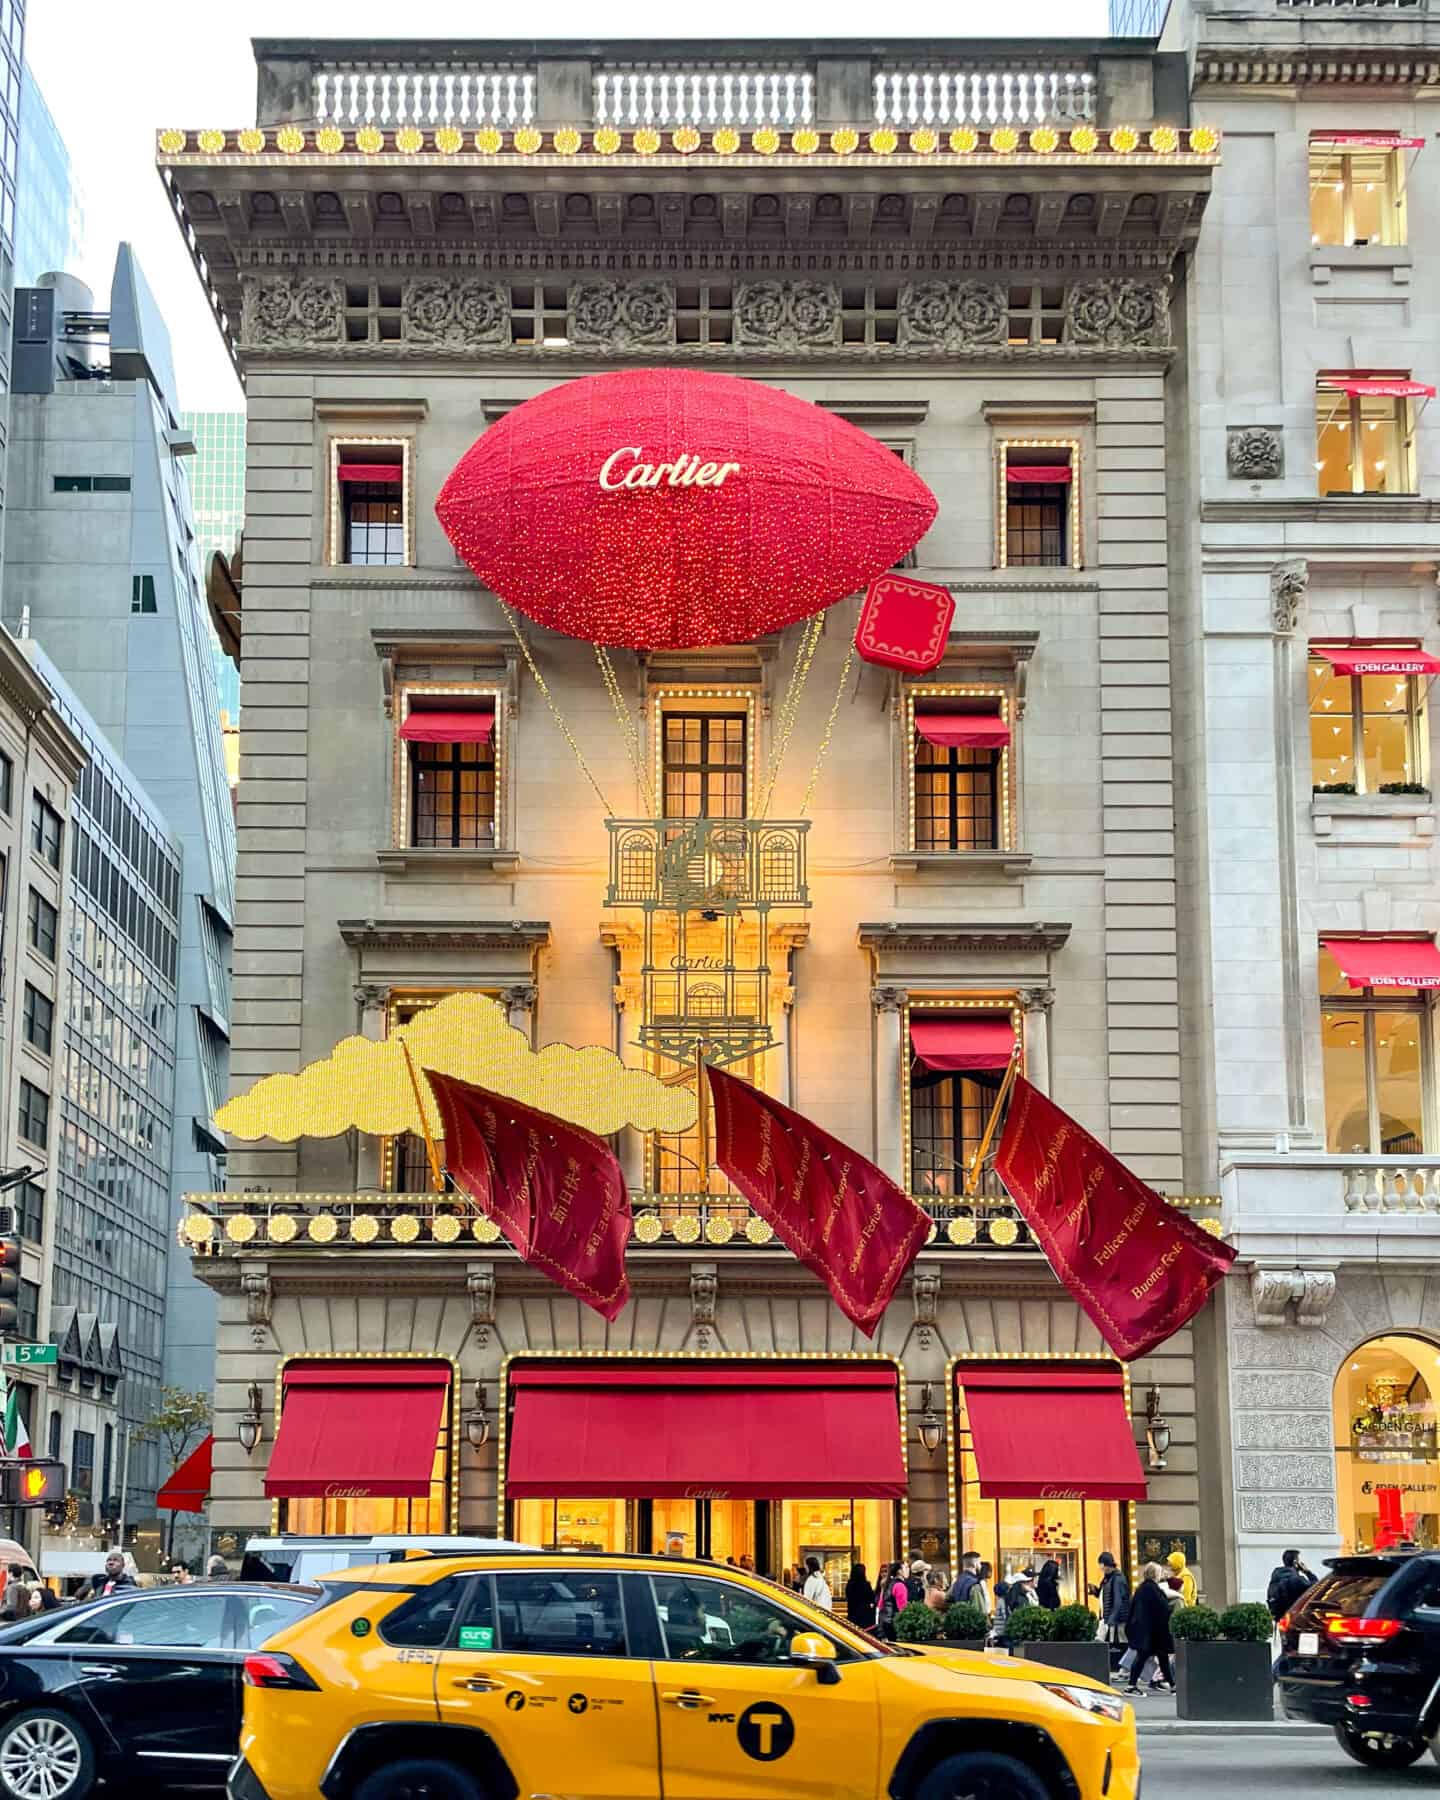 Shopping at Cartier in NYC